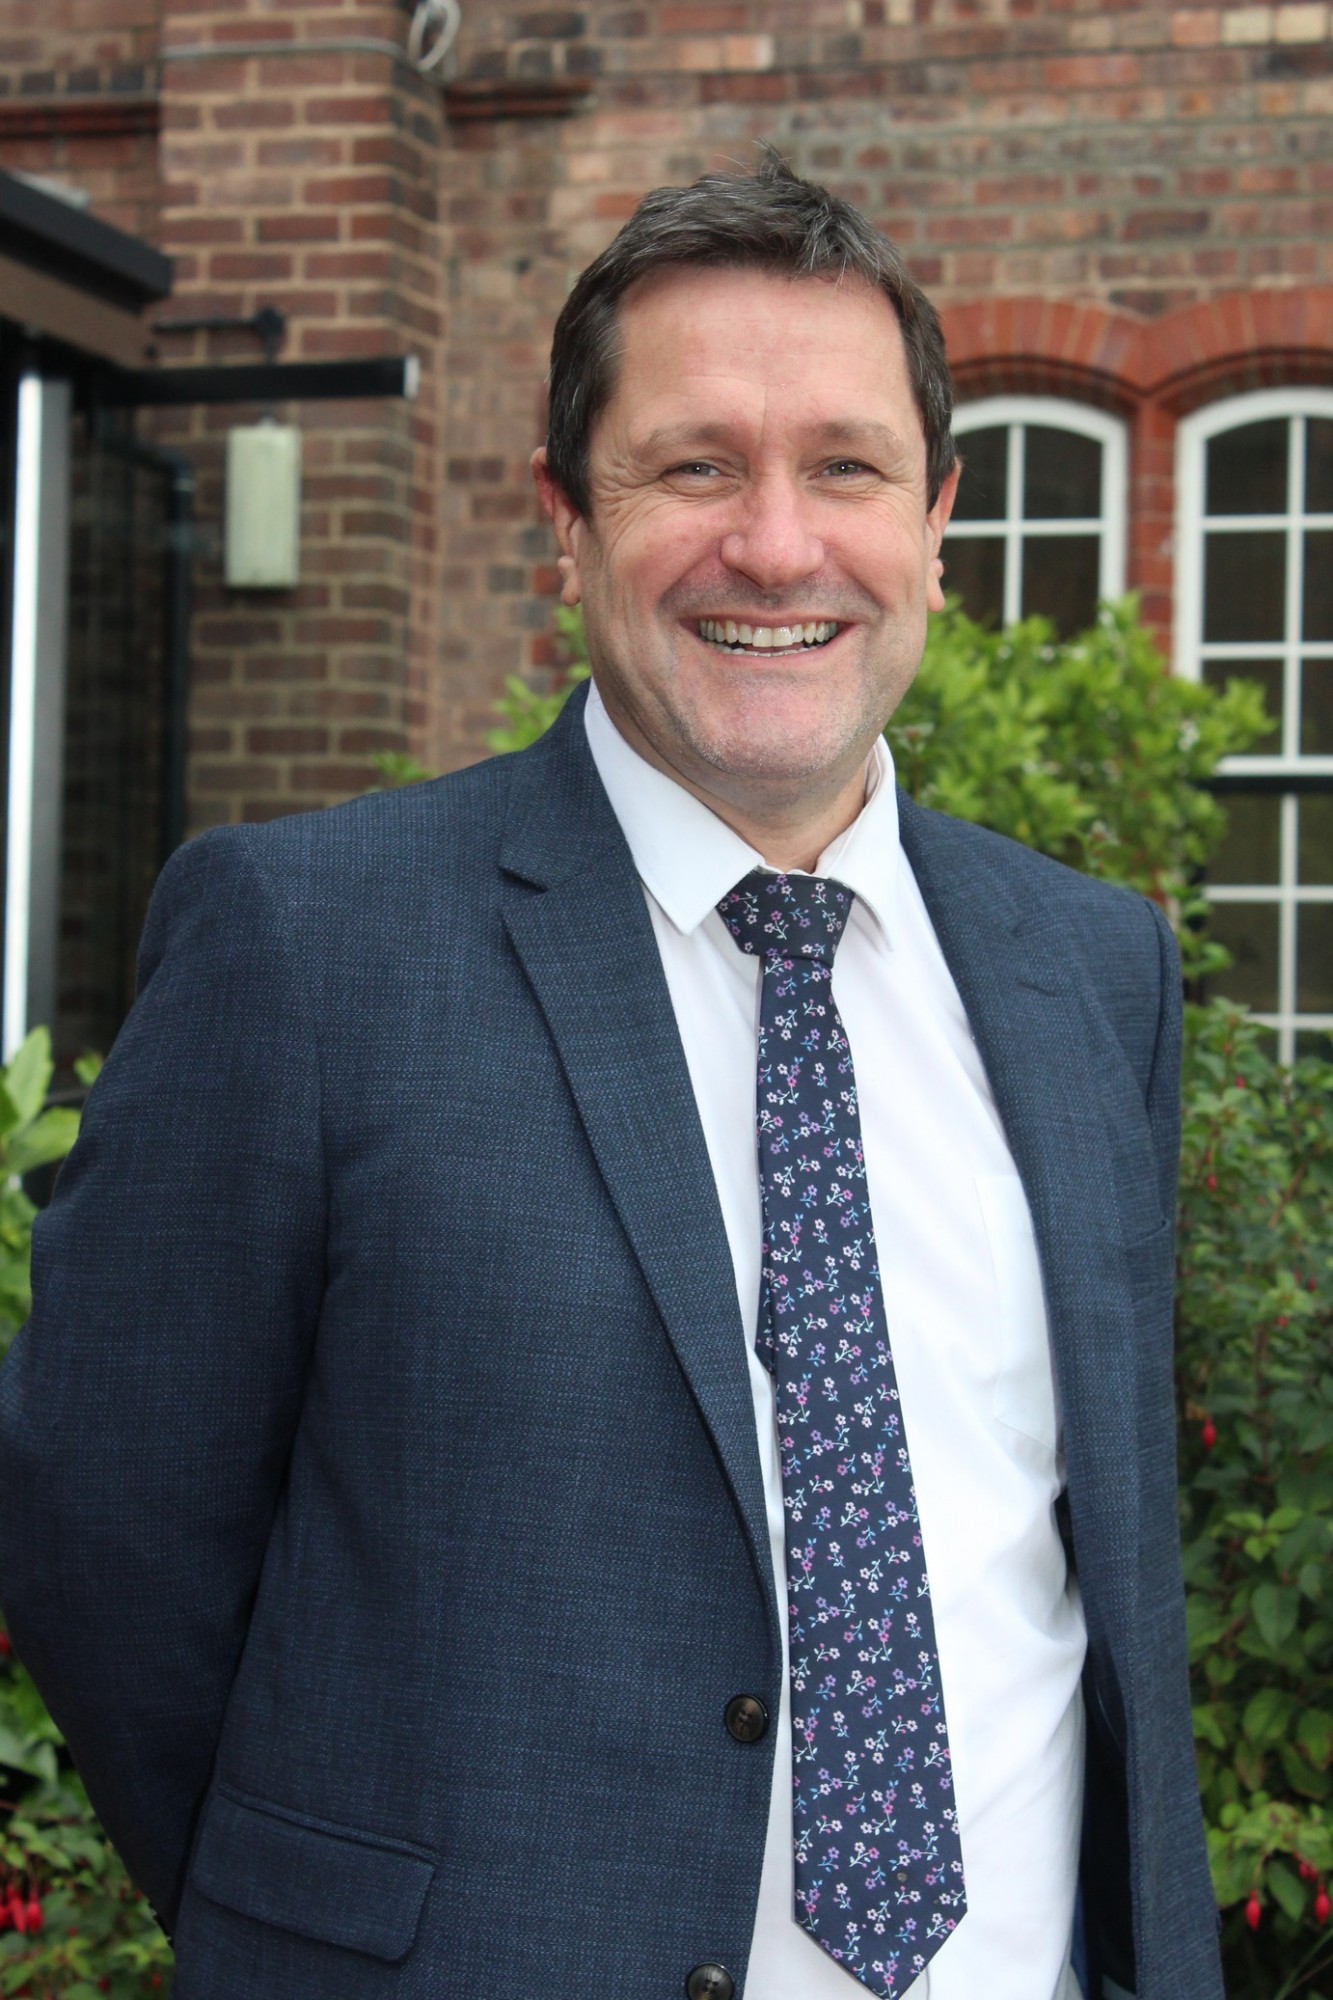 Head of Teaching and Learning Dr Sheldrake